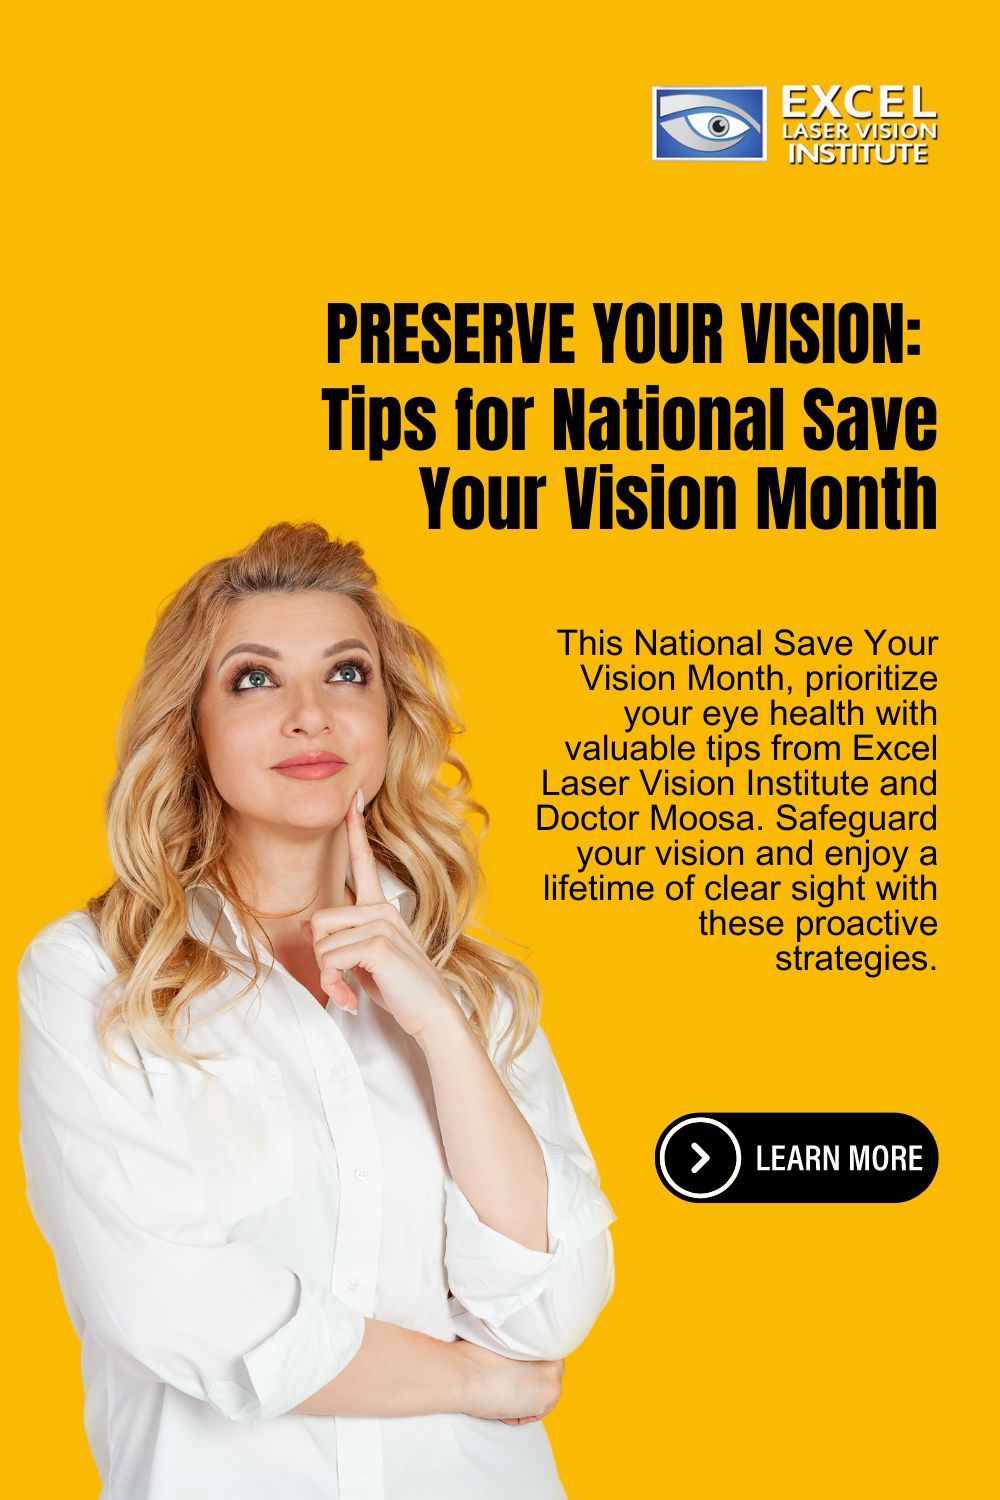 woman-looking-up-blog-title-Preserve-Your-Vision-Tips-for-National-Save-Your-Vision-Month-Pinterest-Pin